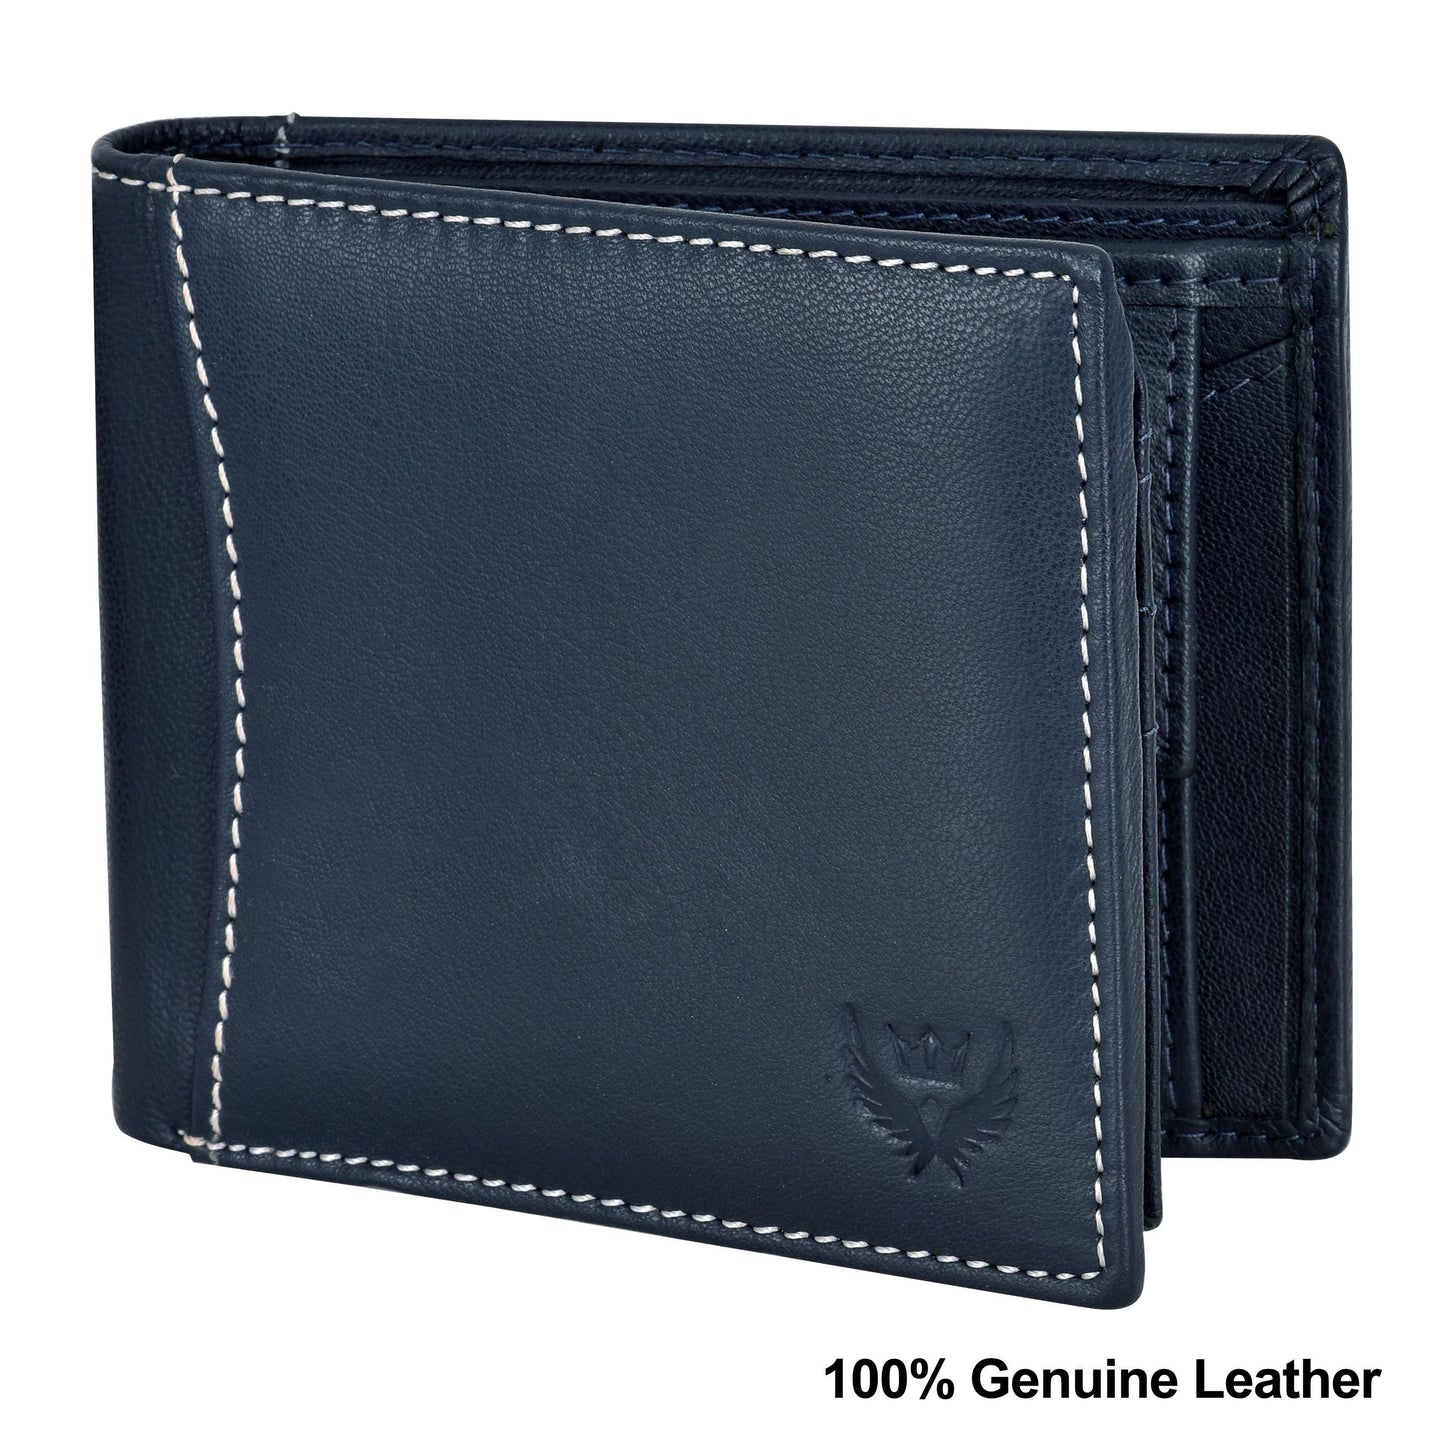 Bi-Fold Autumn Navy Blue RFID Blocking Leather Wallet for Men with Flap & Coin Pocket Feature